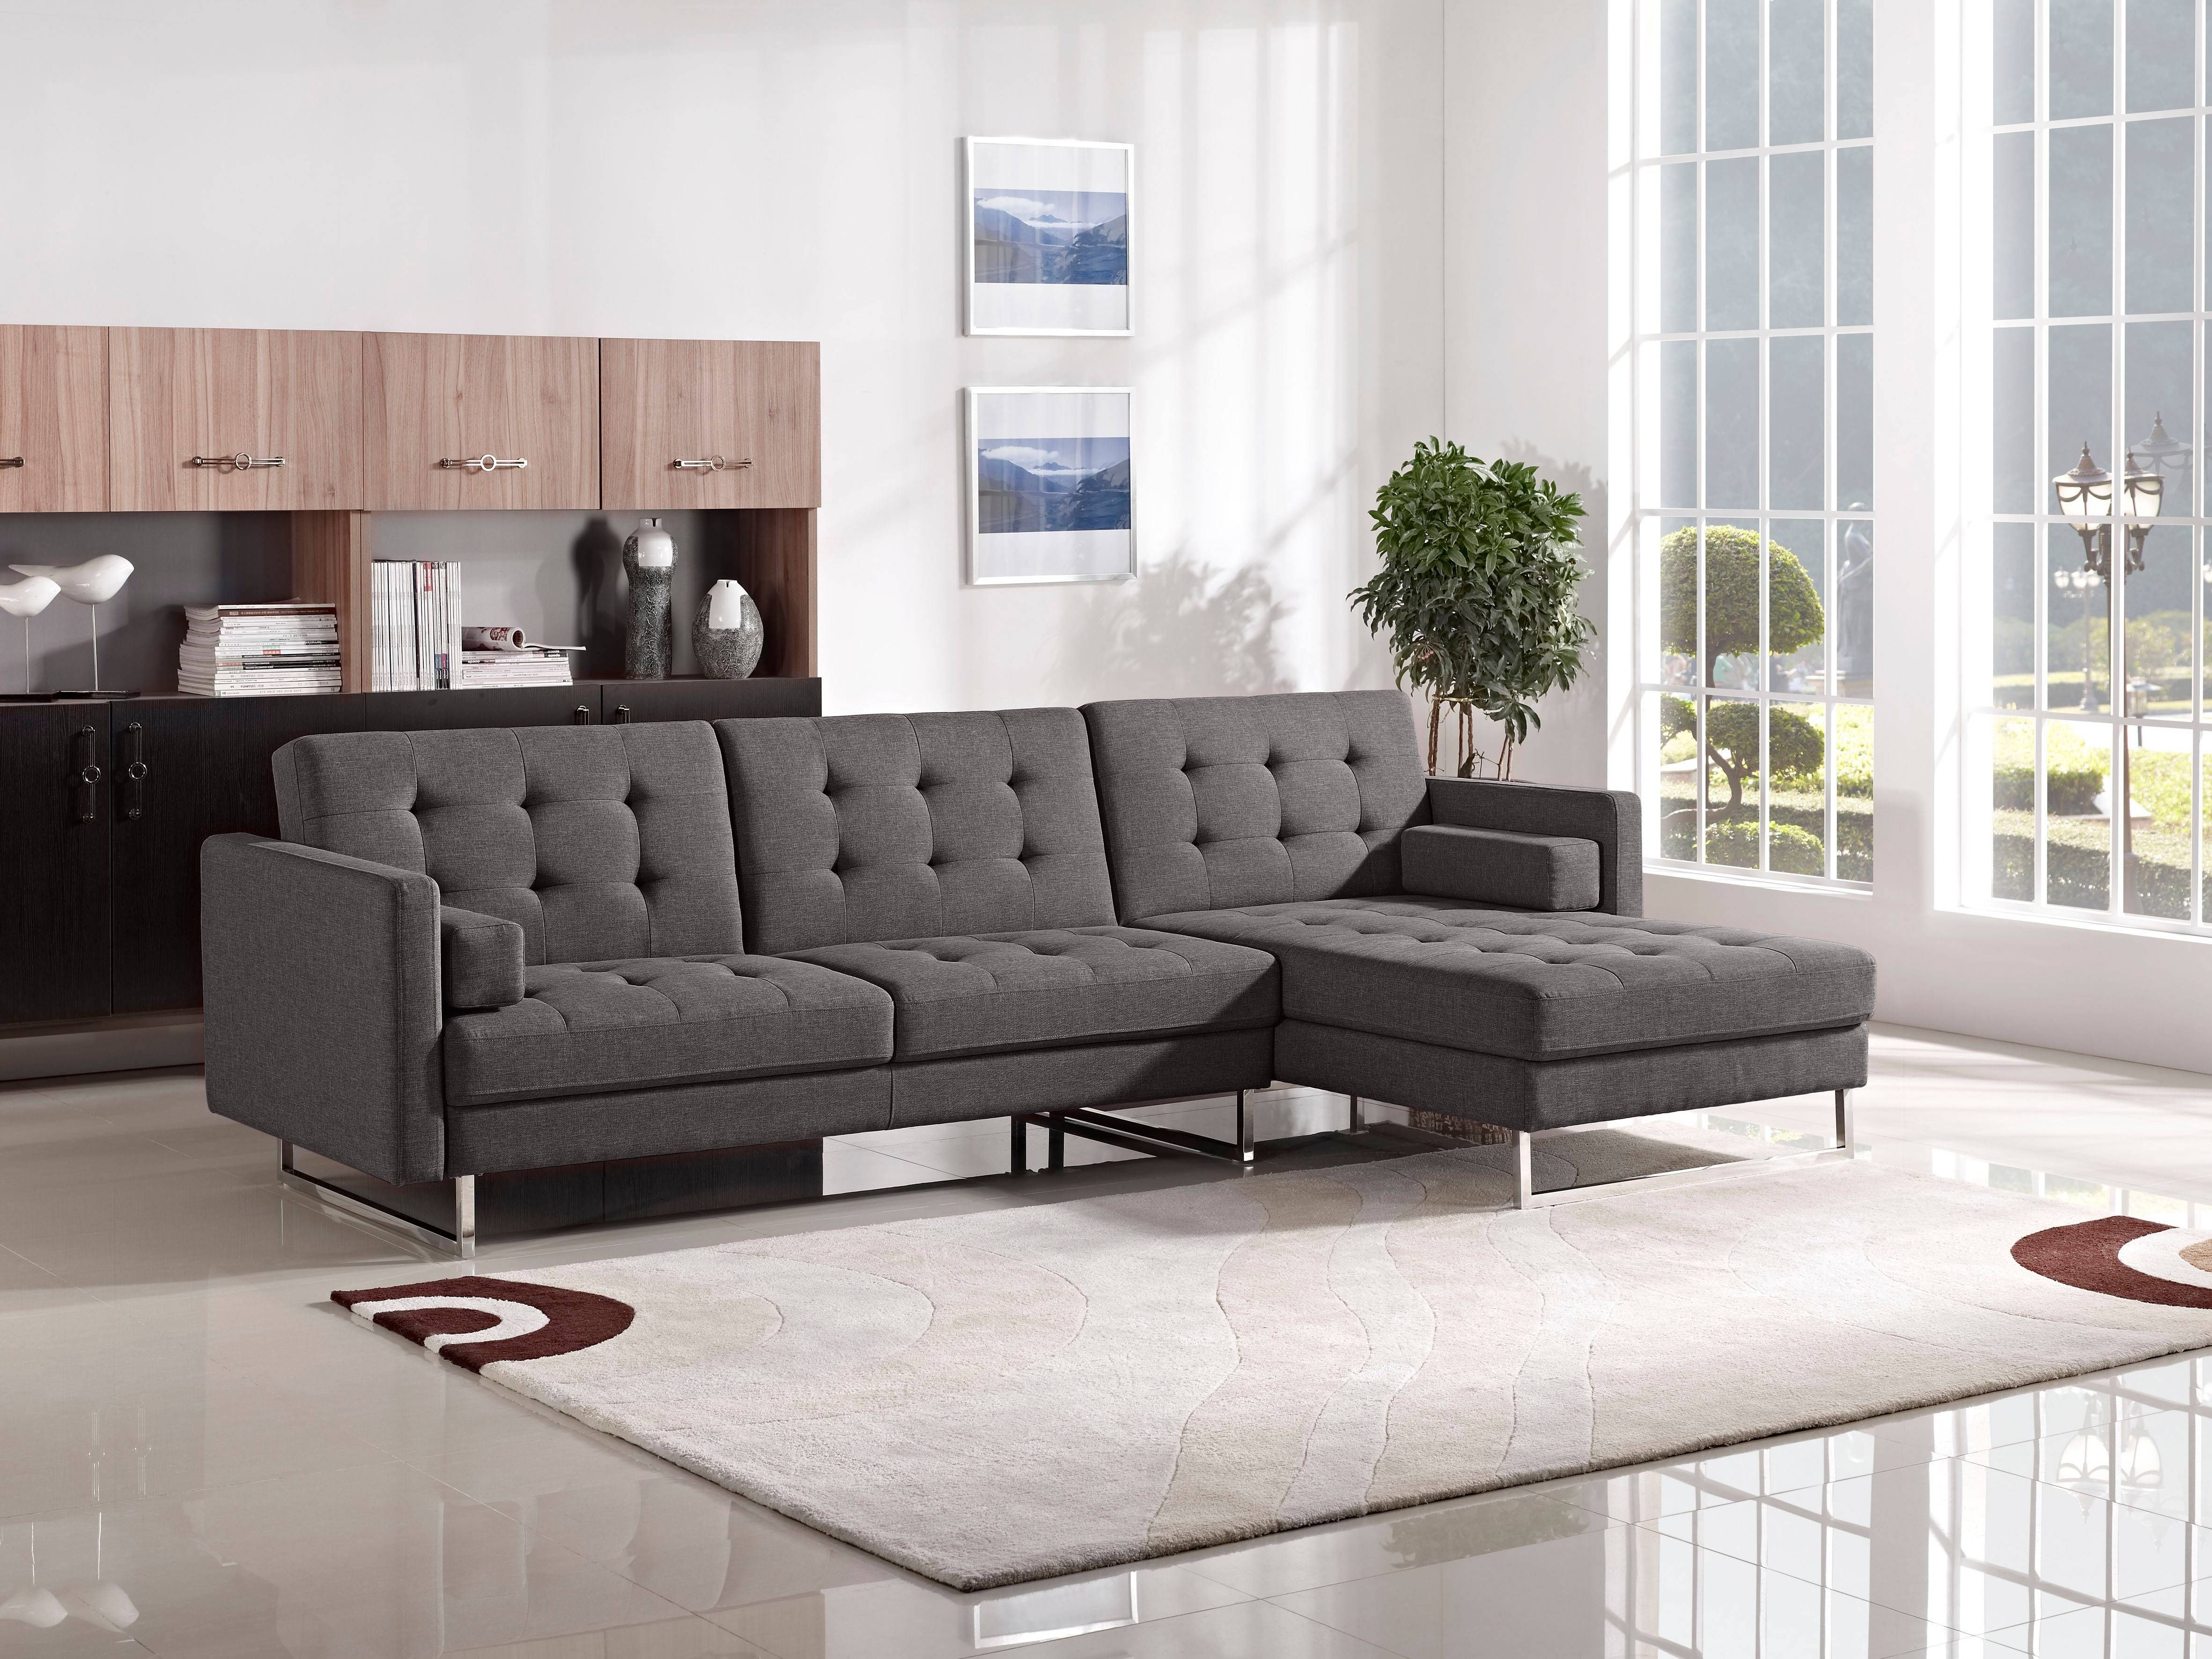 Sofa: Comfort And Style Is Evident In This Dynamic With Tufted For 3 Piece Sectional Sleeper Sofa (View 11 of 30)